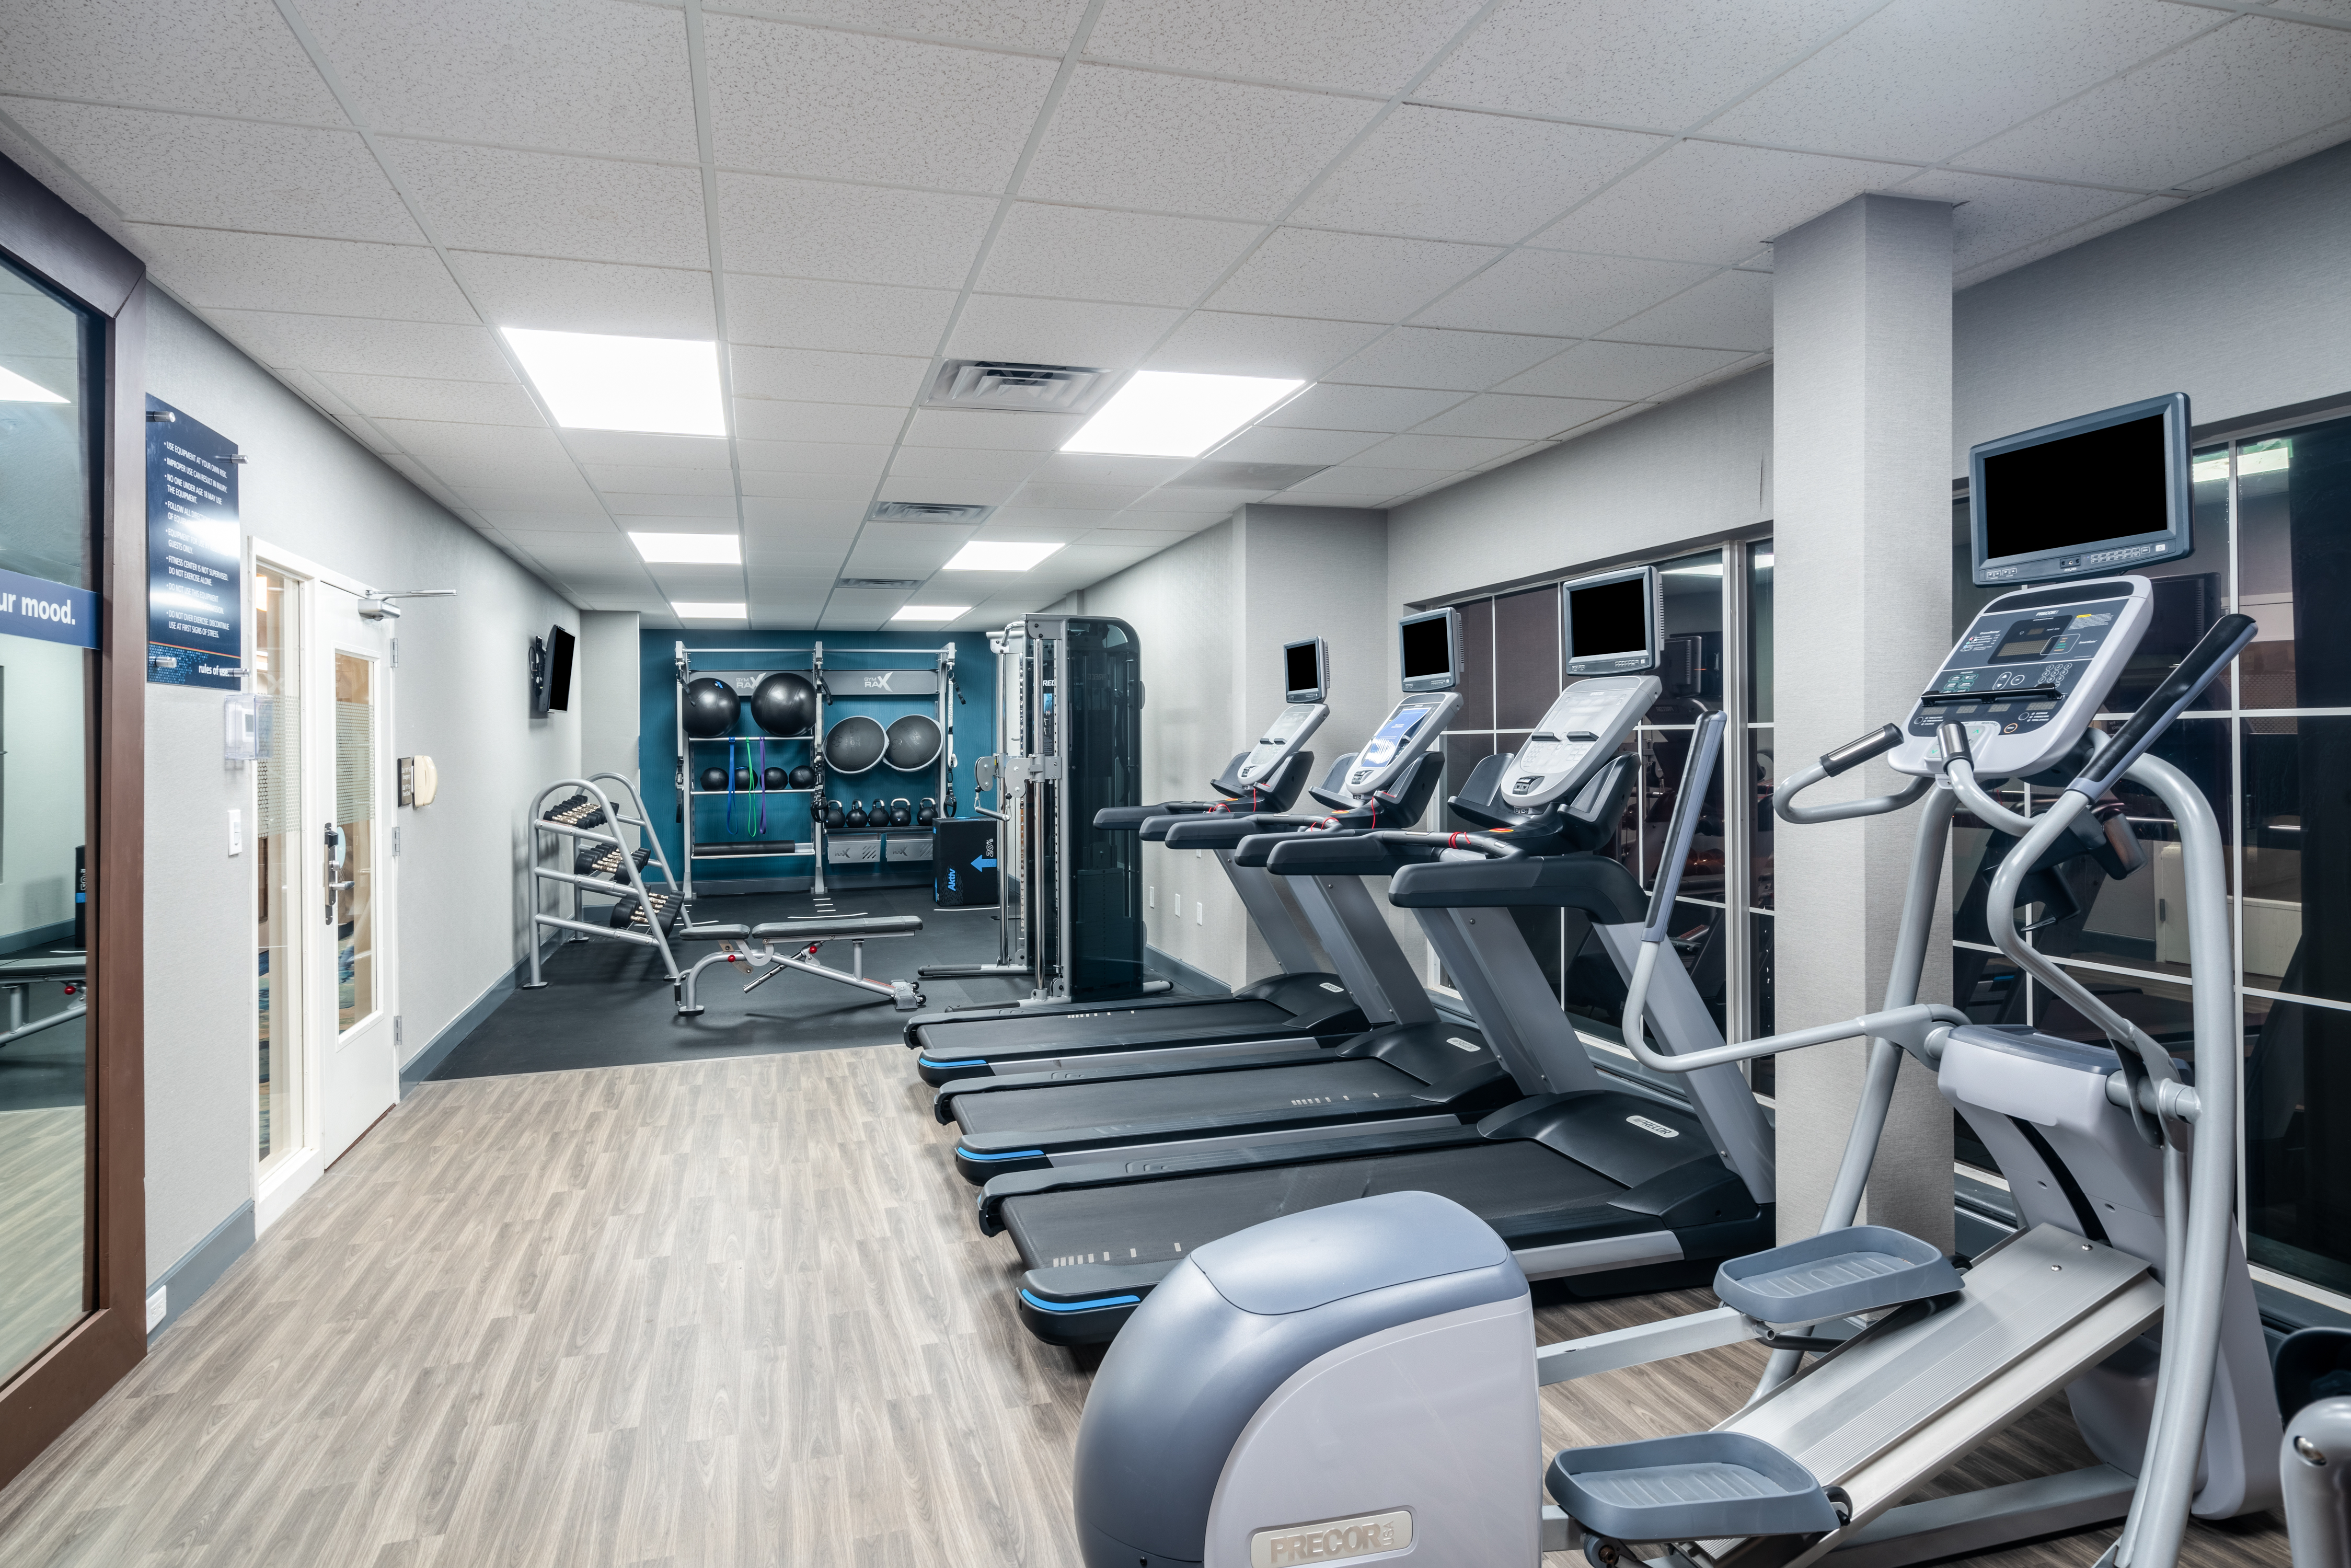 Fitness center with treadmills weights and exercise bike